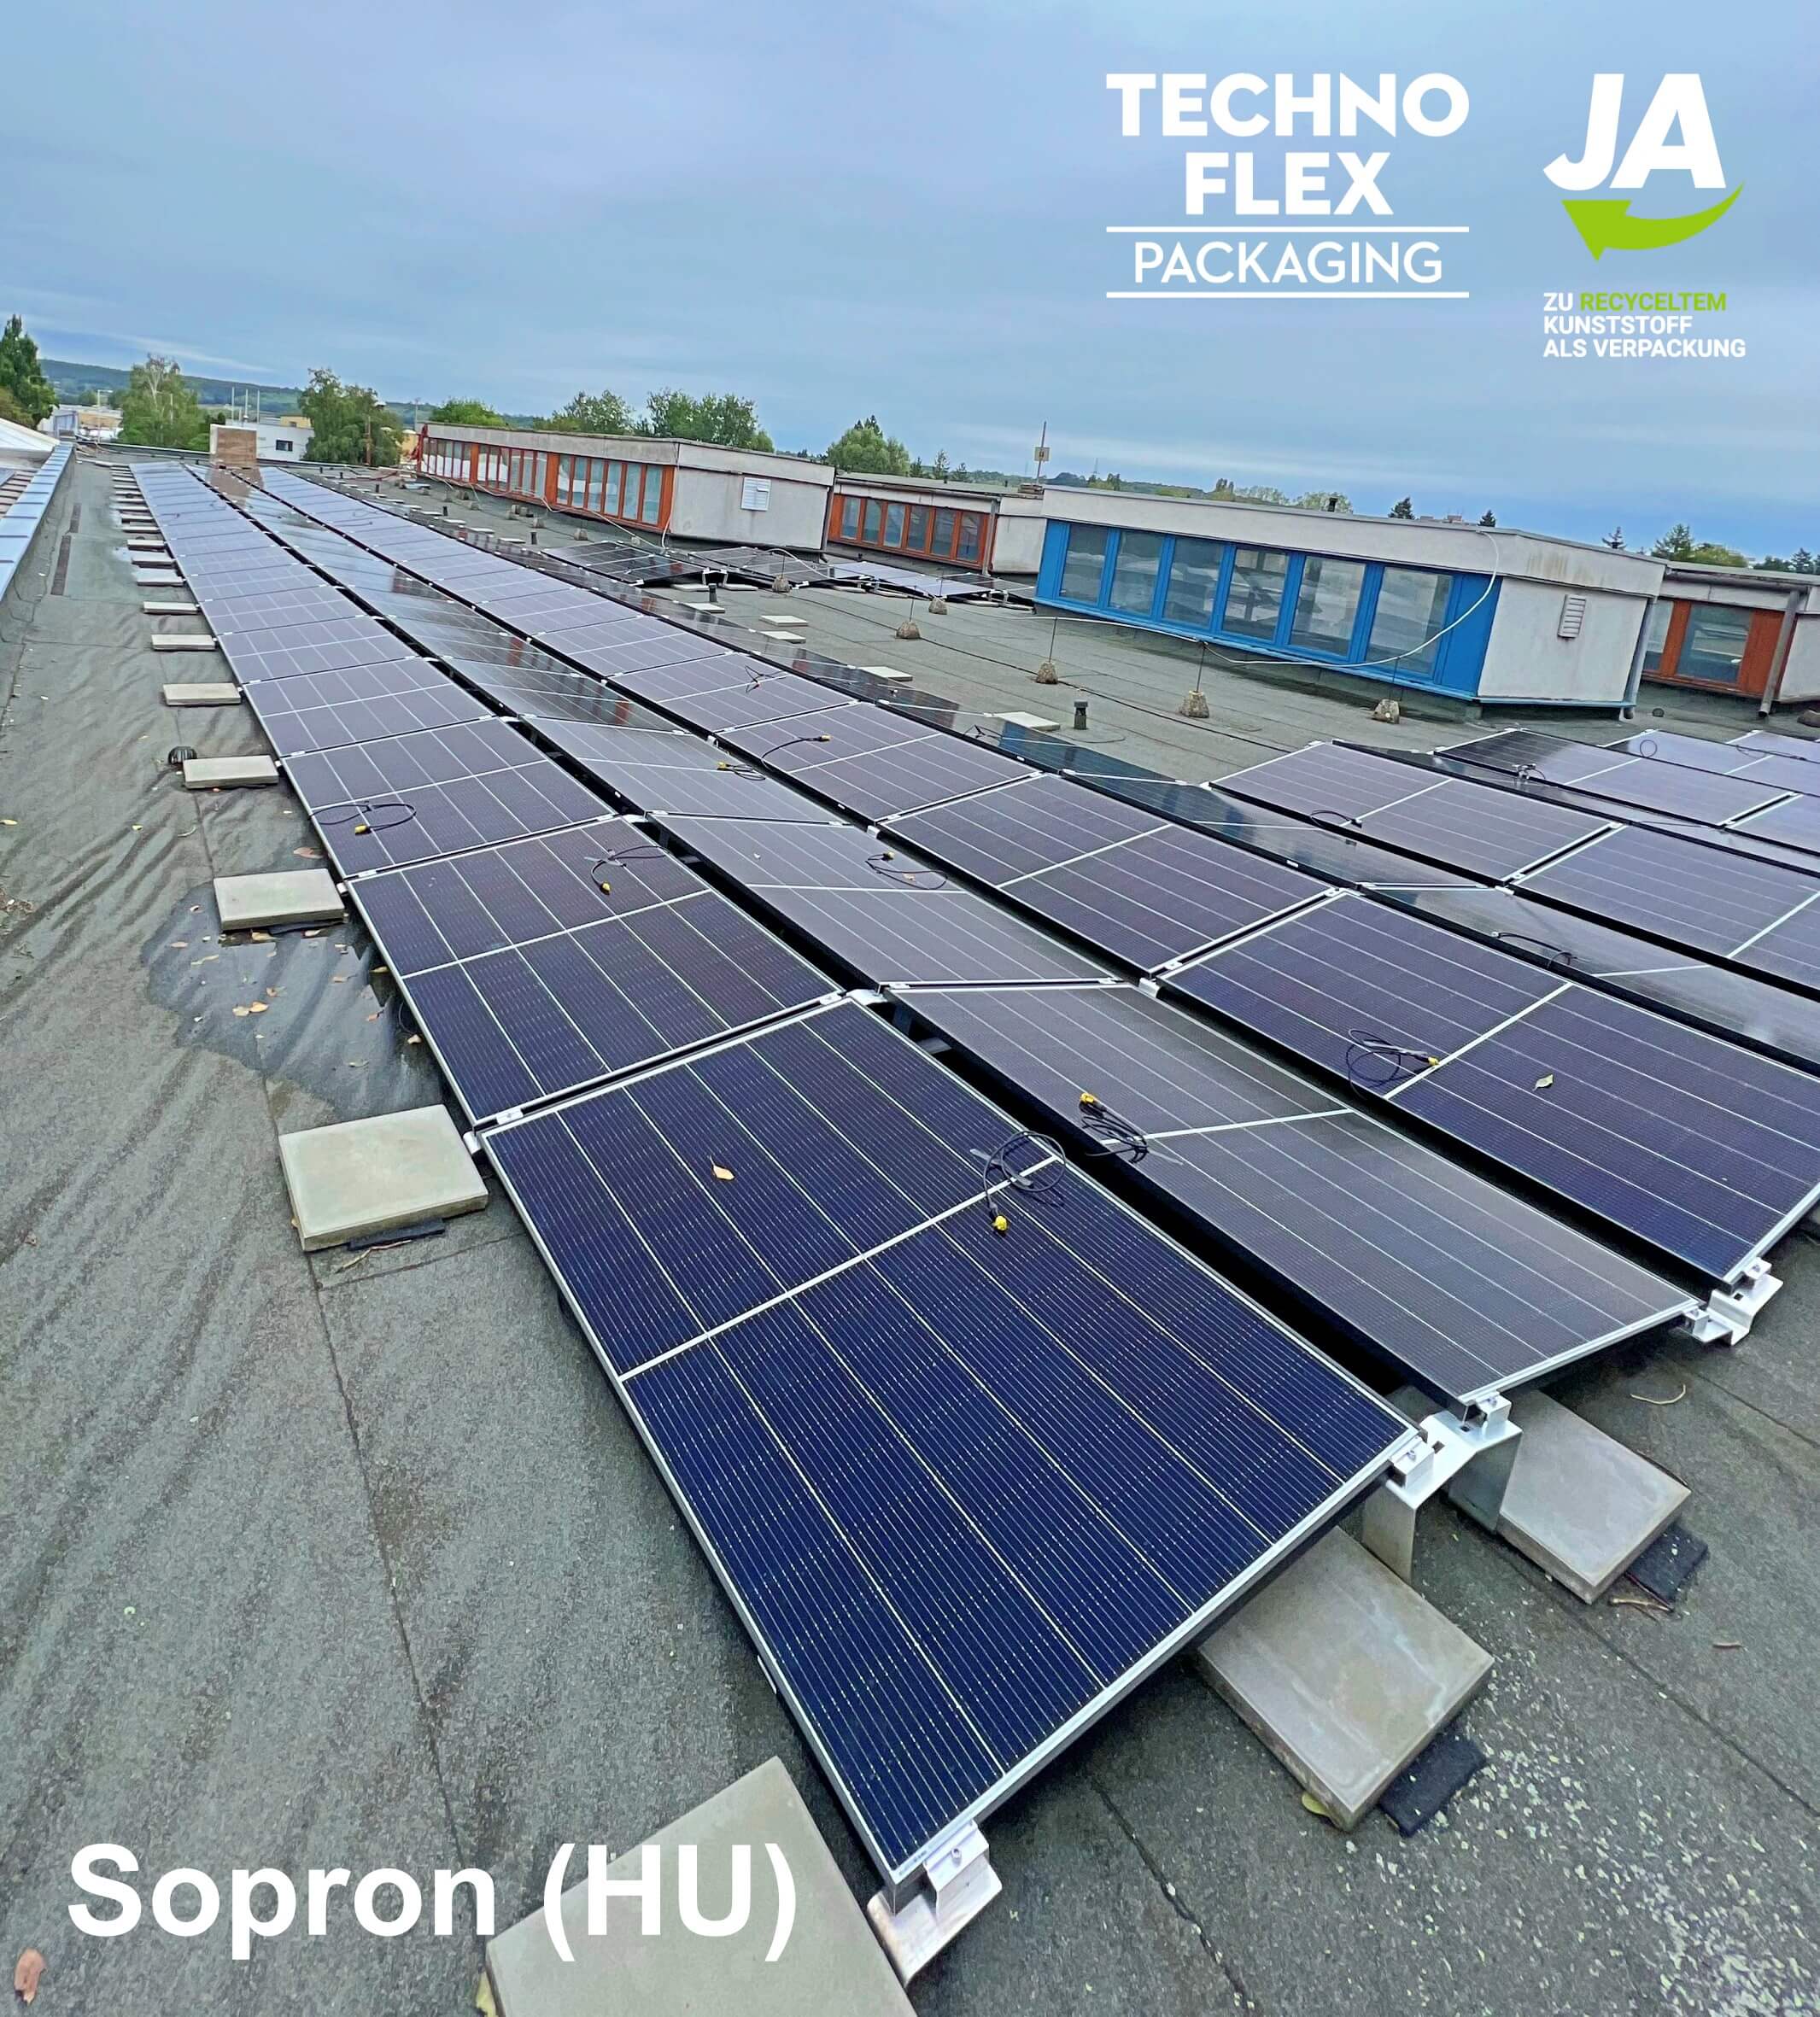 Photovoltaic systems put into operation at both locations (AT & HU) 1